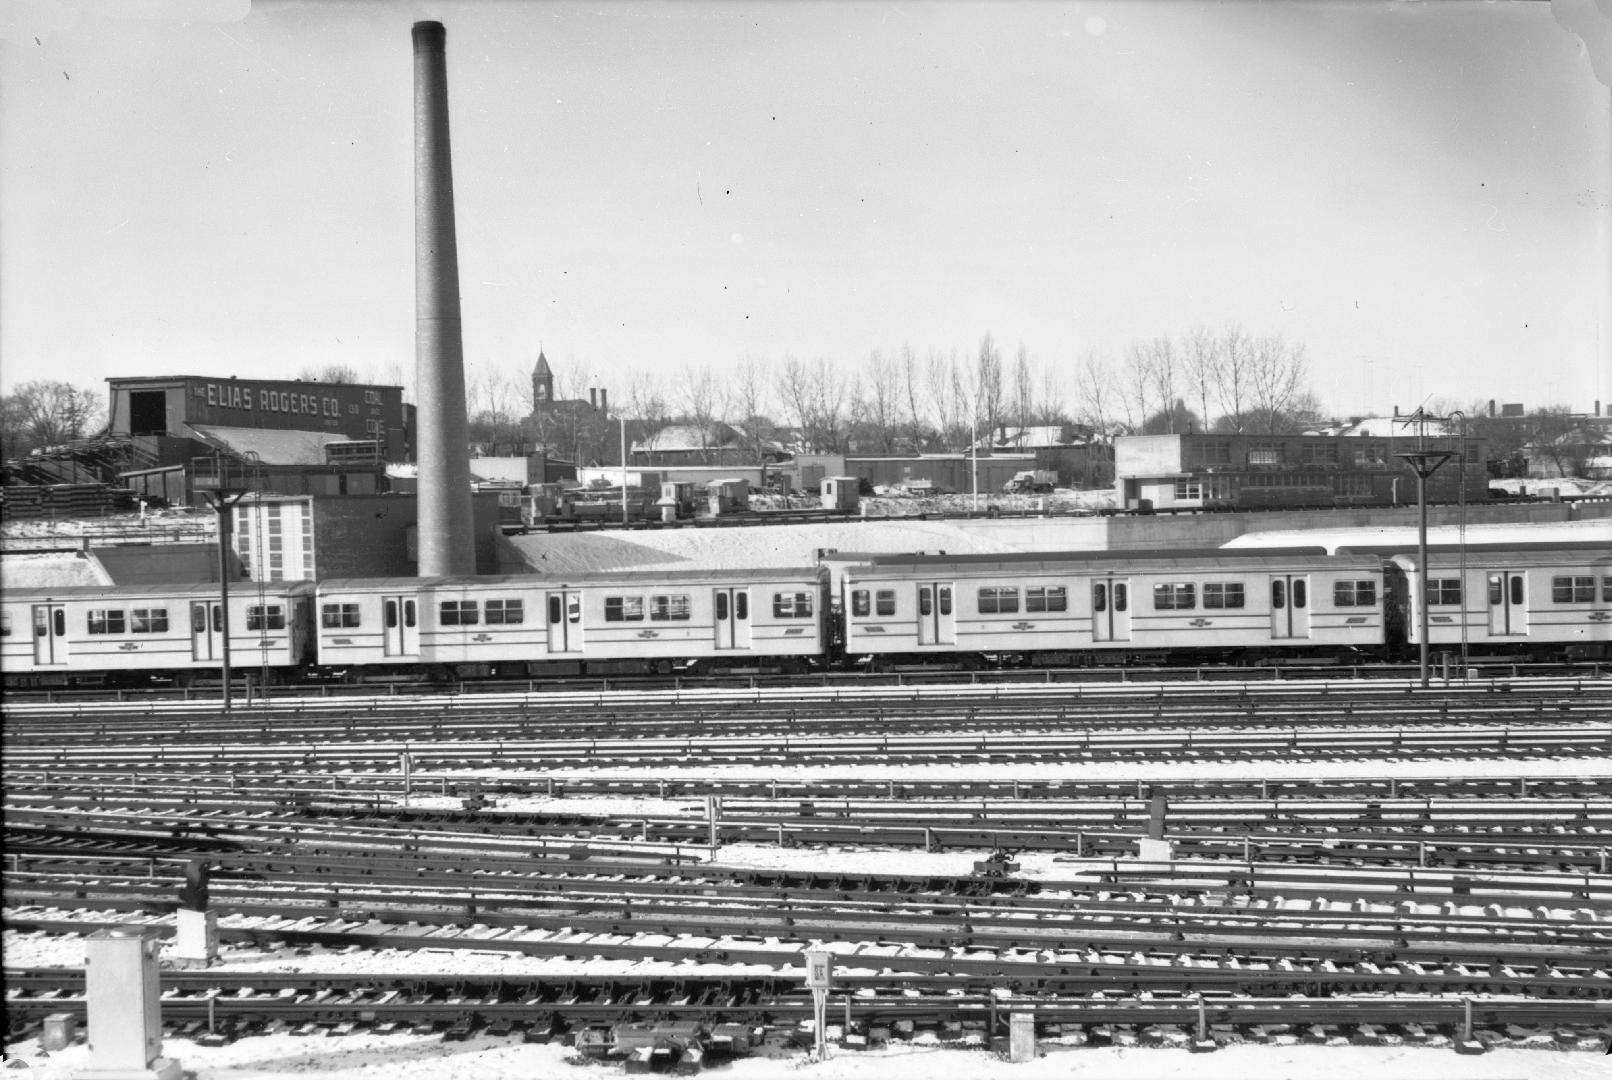 Yonge St. Subway, Davisville Yards, looking west. Image shows multiple tracks and a subway trai ...